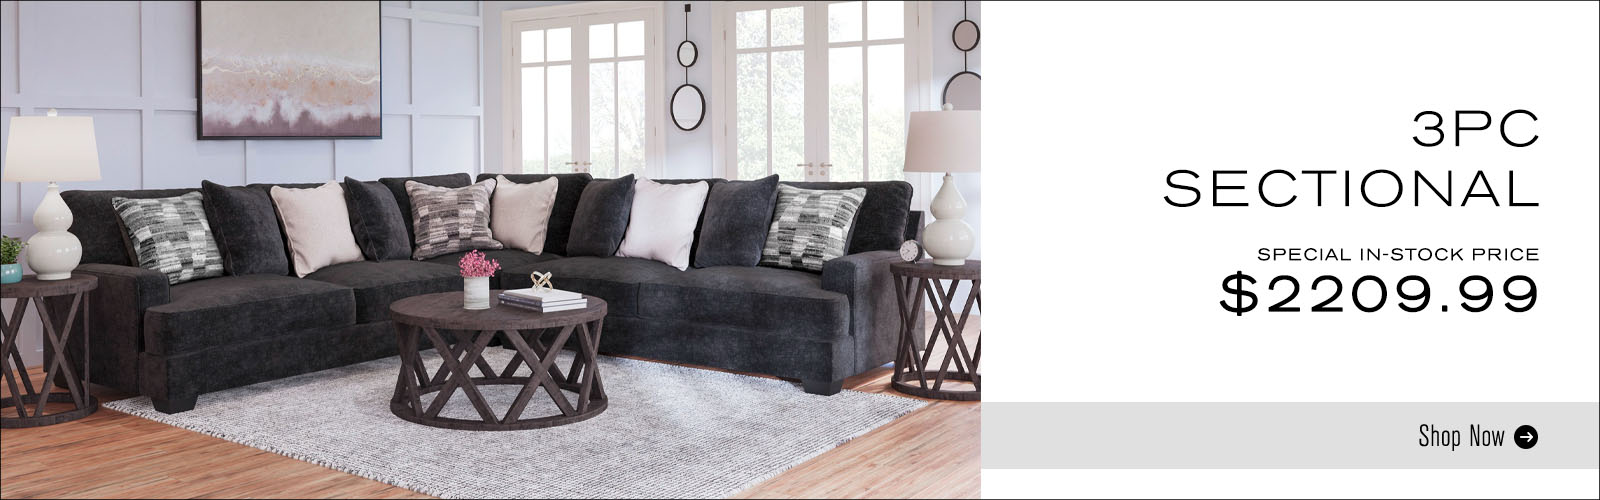 3PC Sectional - Shop Now